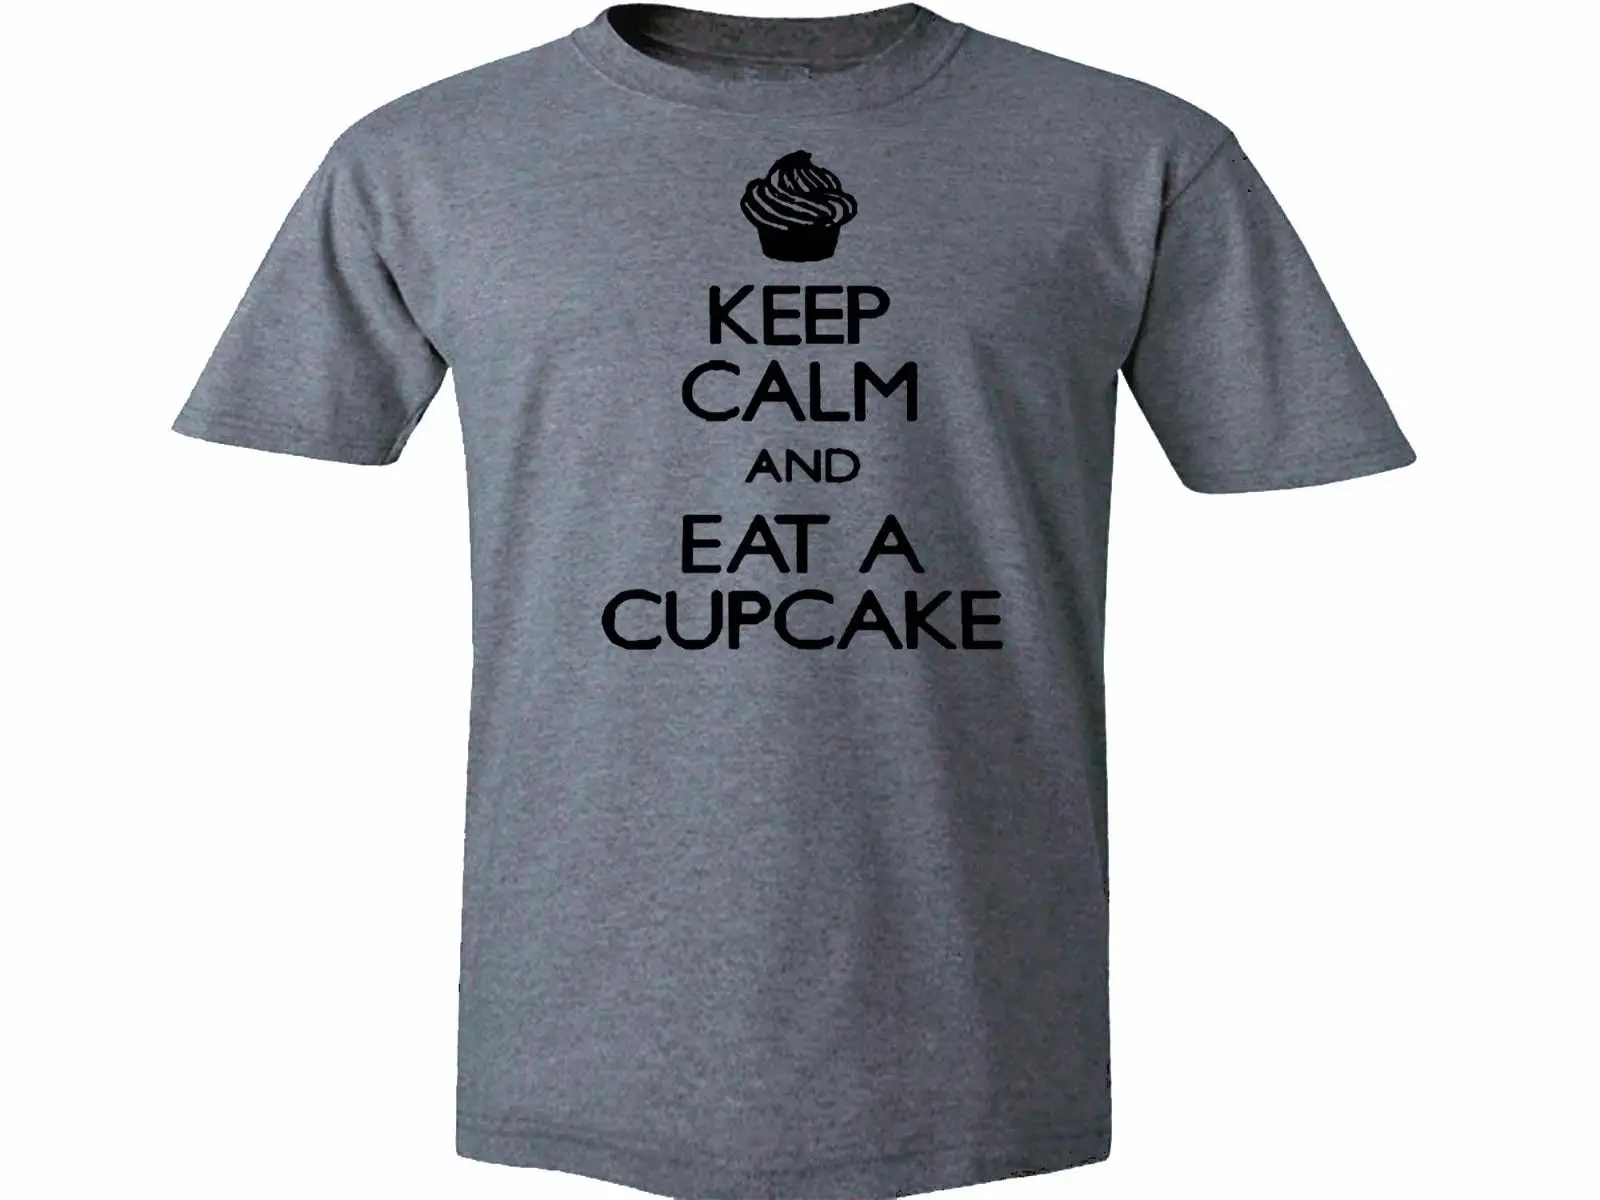 

2019 Keep calm & eat a Cupcake funny parody gifts gray 100% cotton new t-shirt